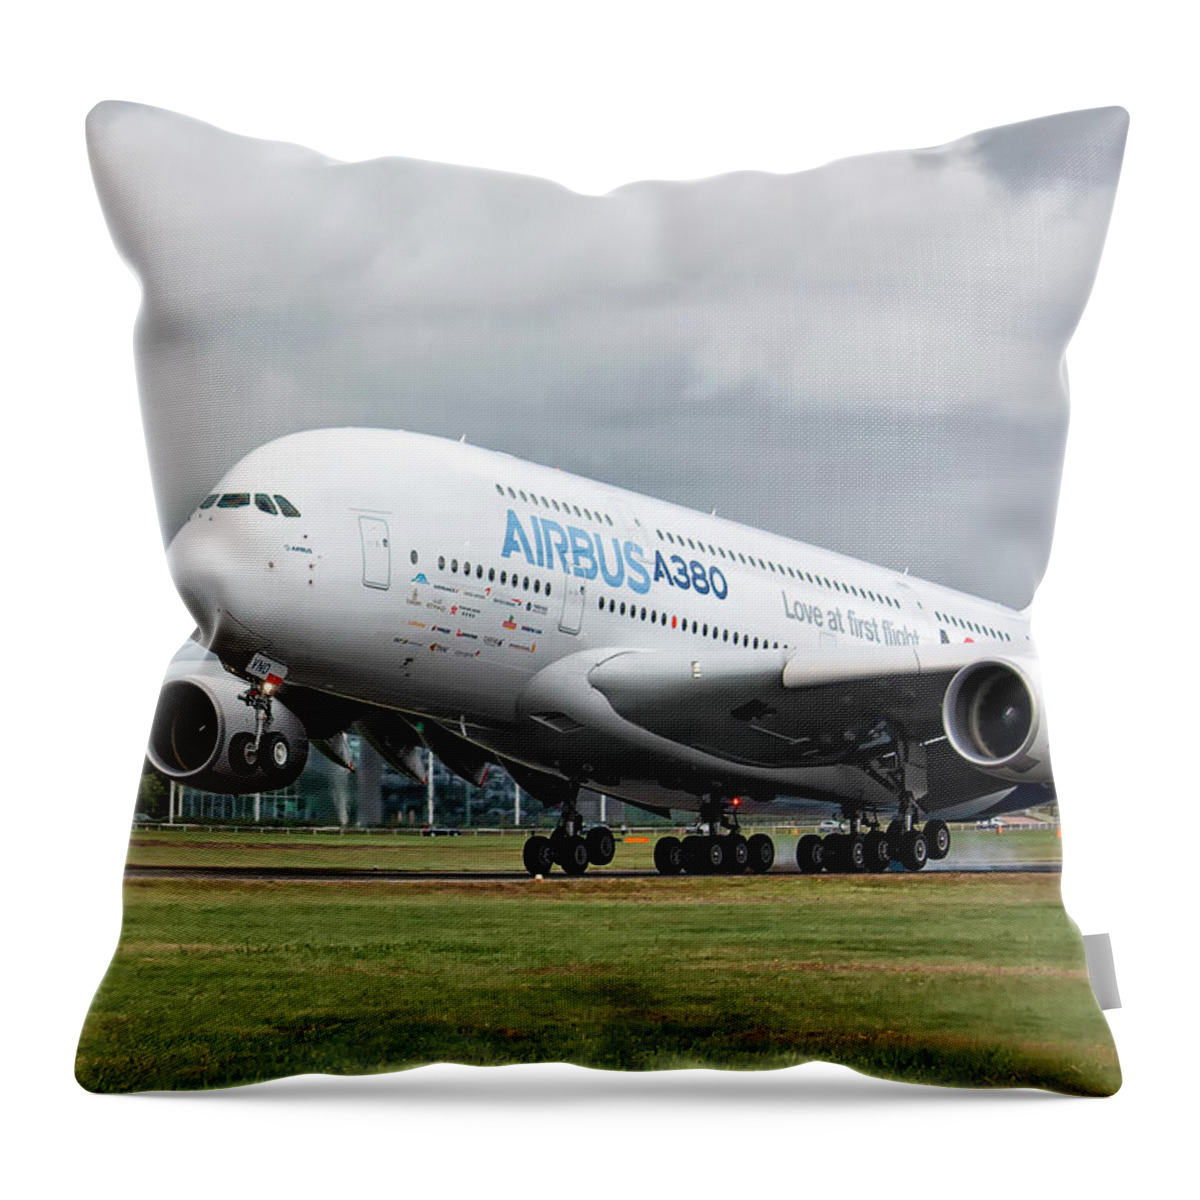 Airbus A380 Throw Pillow featuring the photograph Airbus A380 Landing by Shirley Mitchell